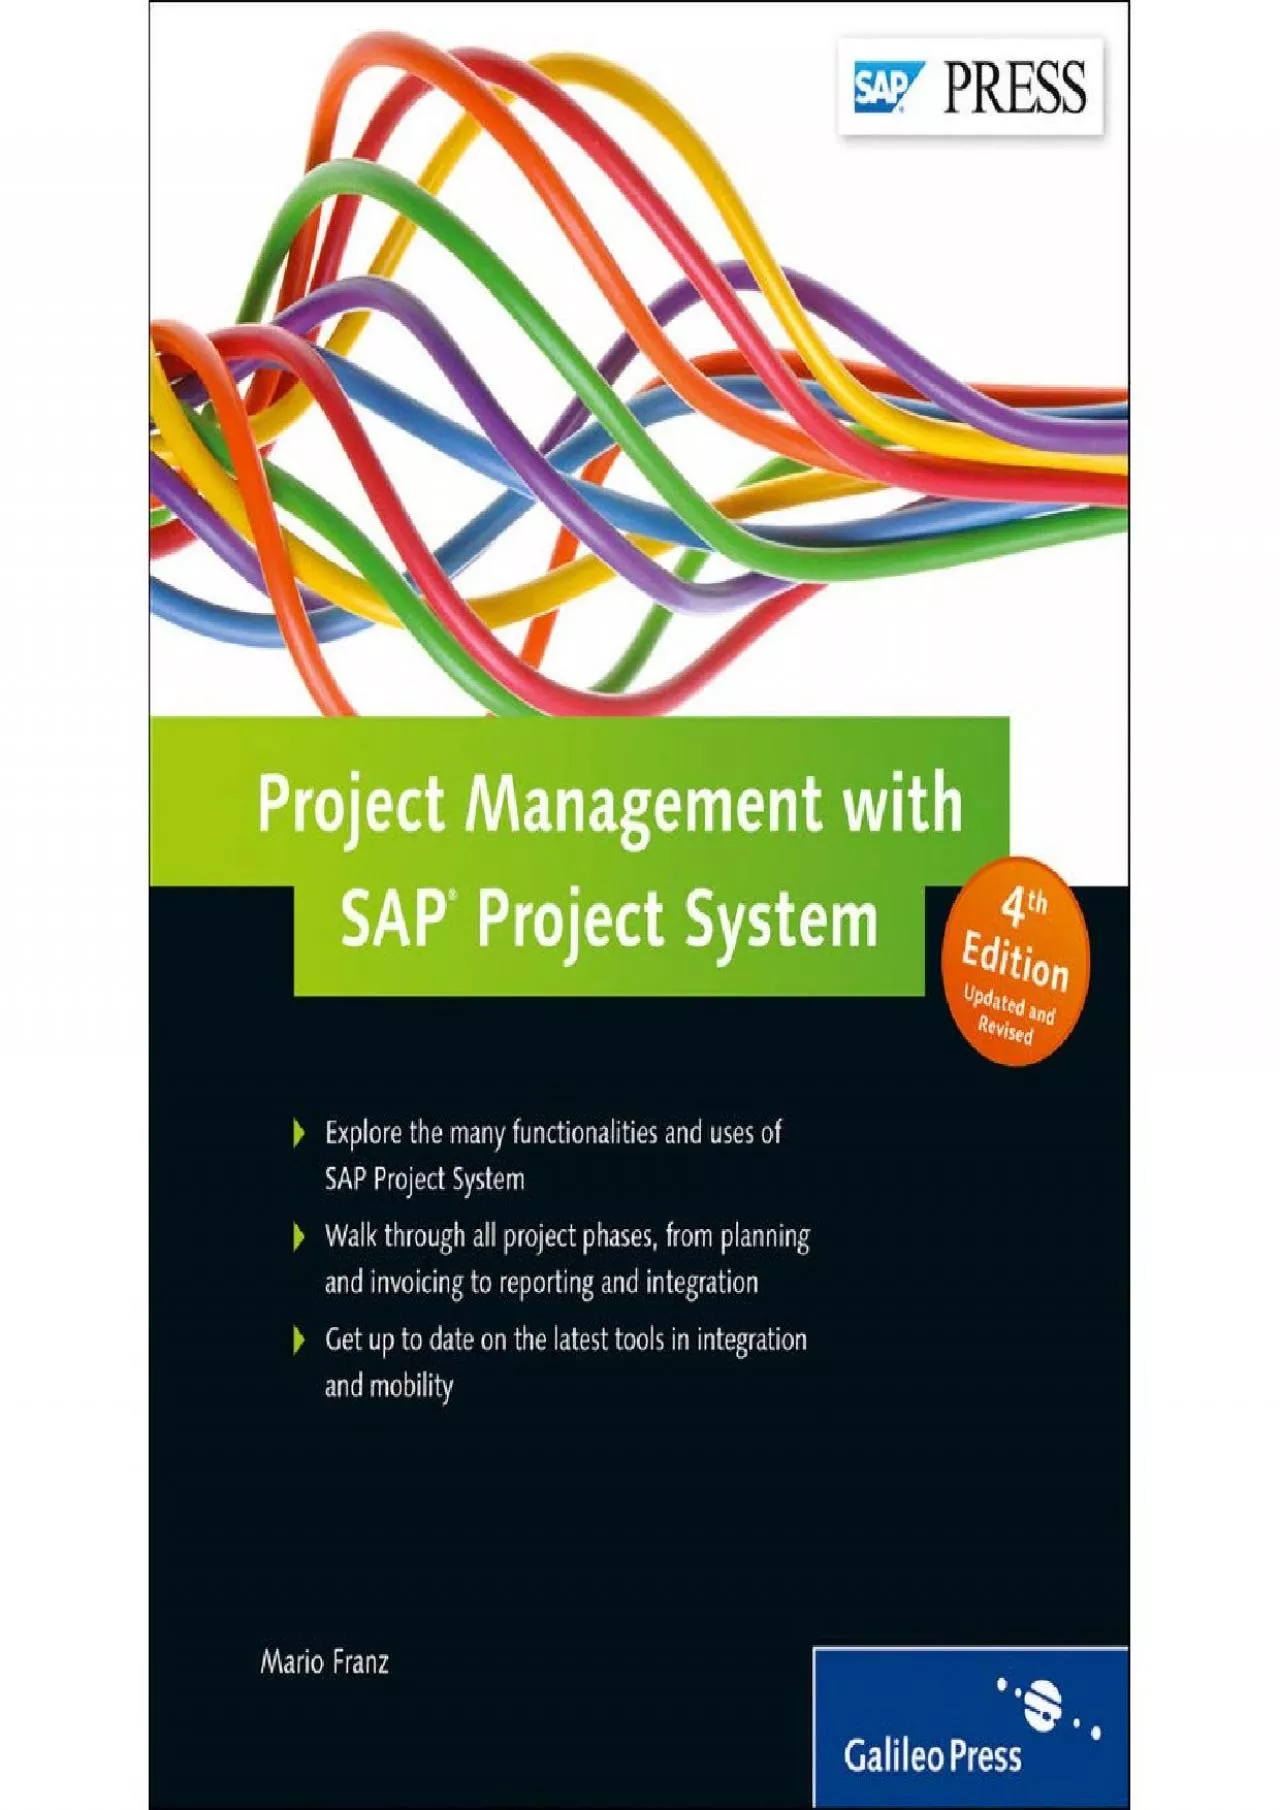 Project Management with SAP Project System (4th Edition)